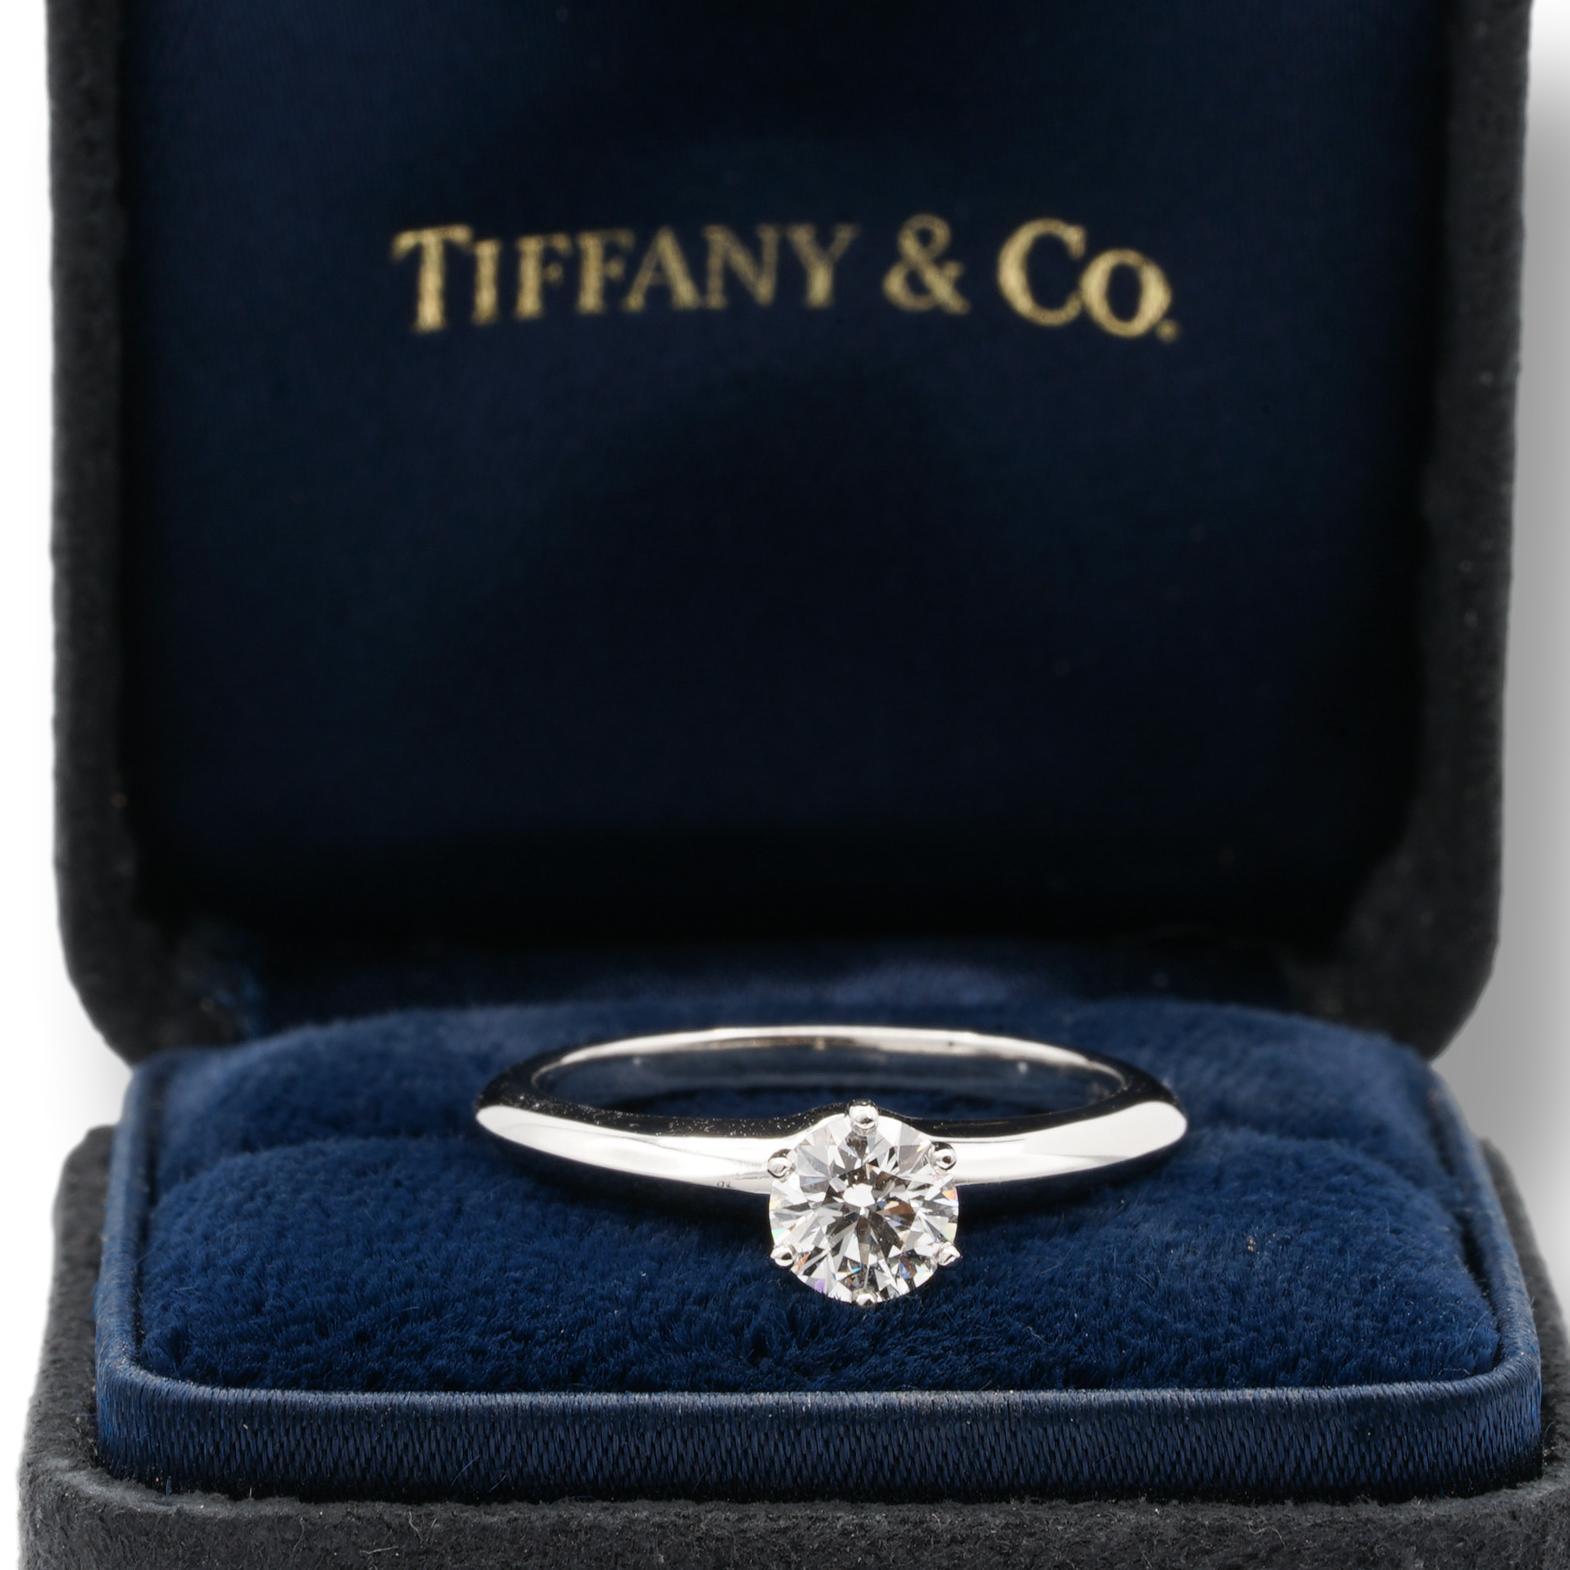 Tiffany & Co Round Brilliant Solitaire Engagement Ring featuring a 0.53 ct Center I color, VS1 clarity, finely crafted in a 6 prong Platinum Mounting. ( Current Retail for $6,300)
Includes Original Tiffany certificate and Box. 

Stamped: Tiffany &